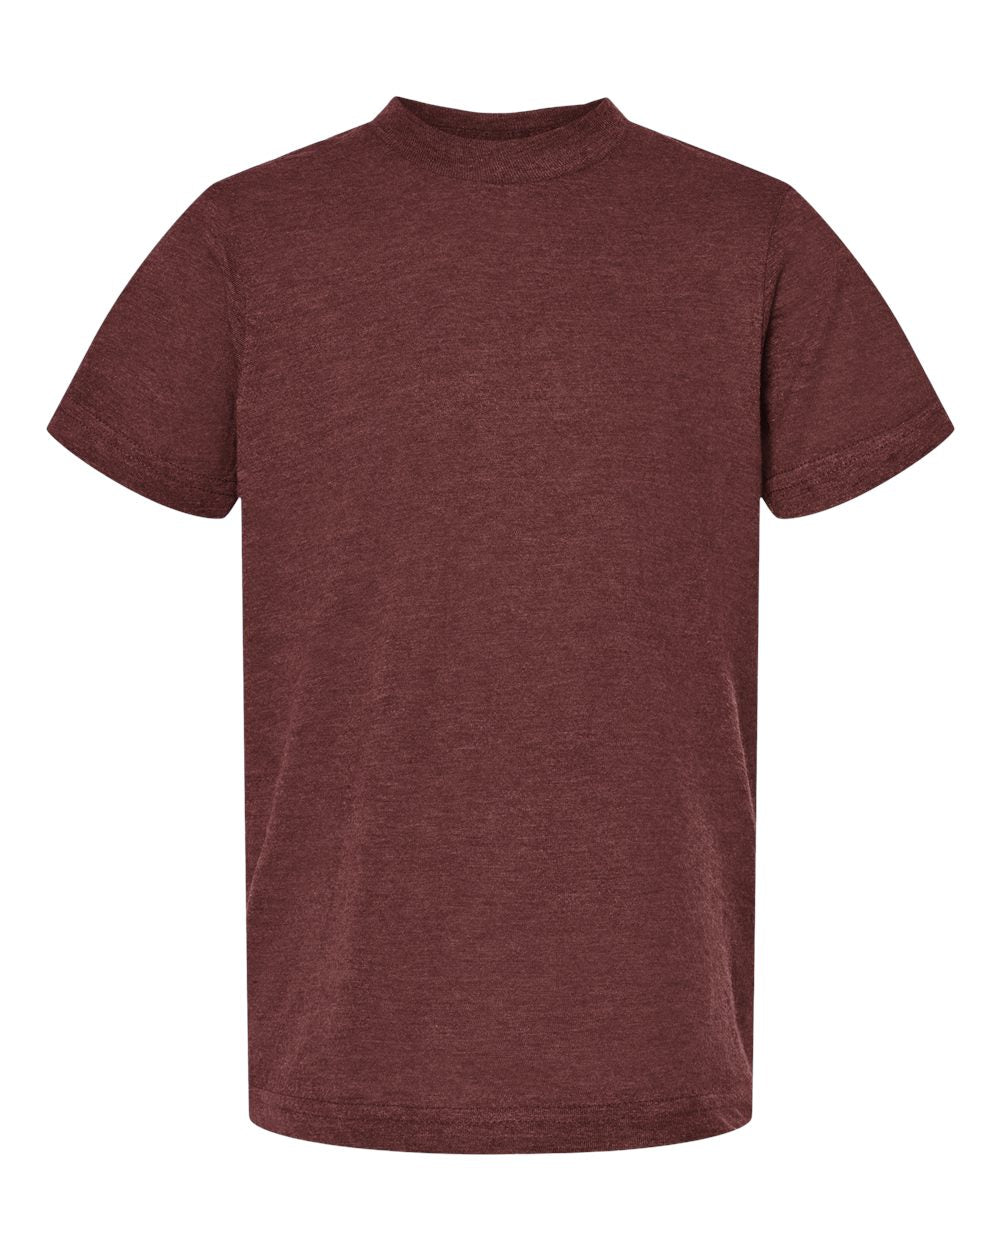 Tultex Youth Tee (235) in Heather Burgundy